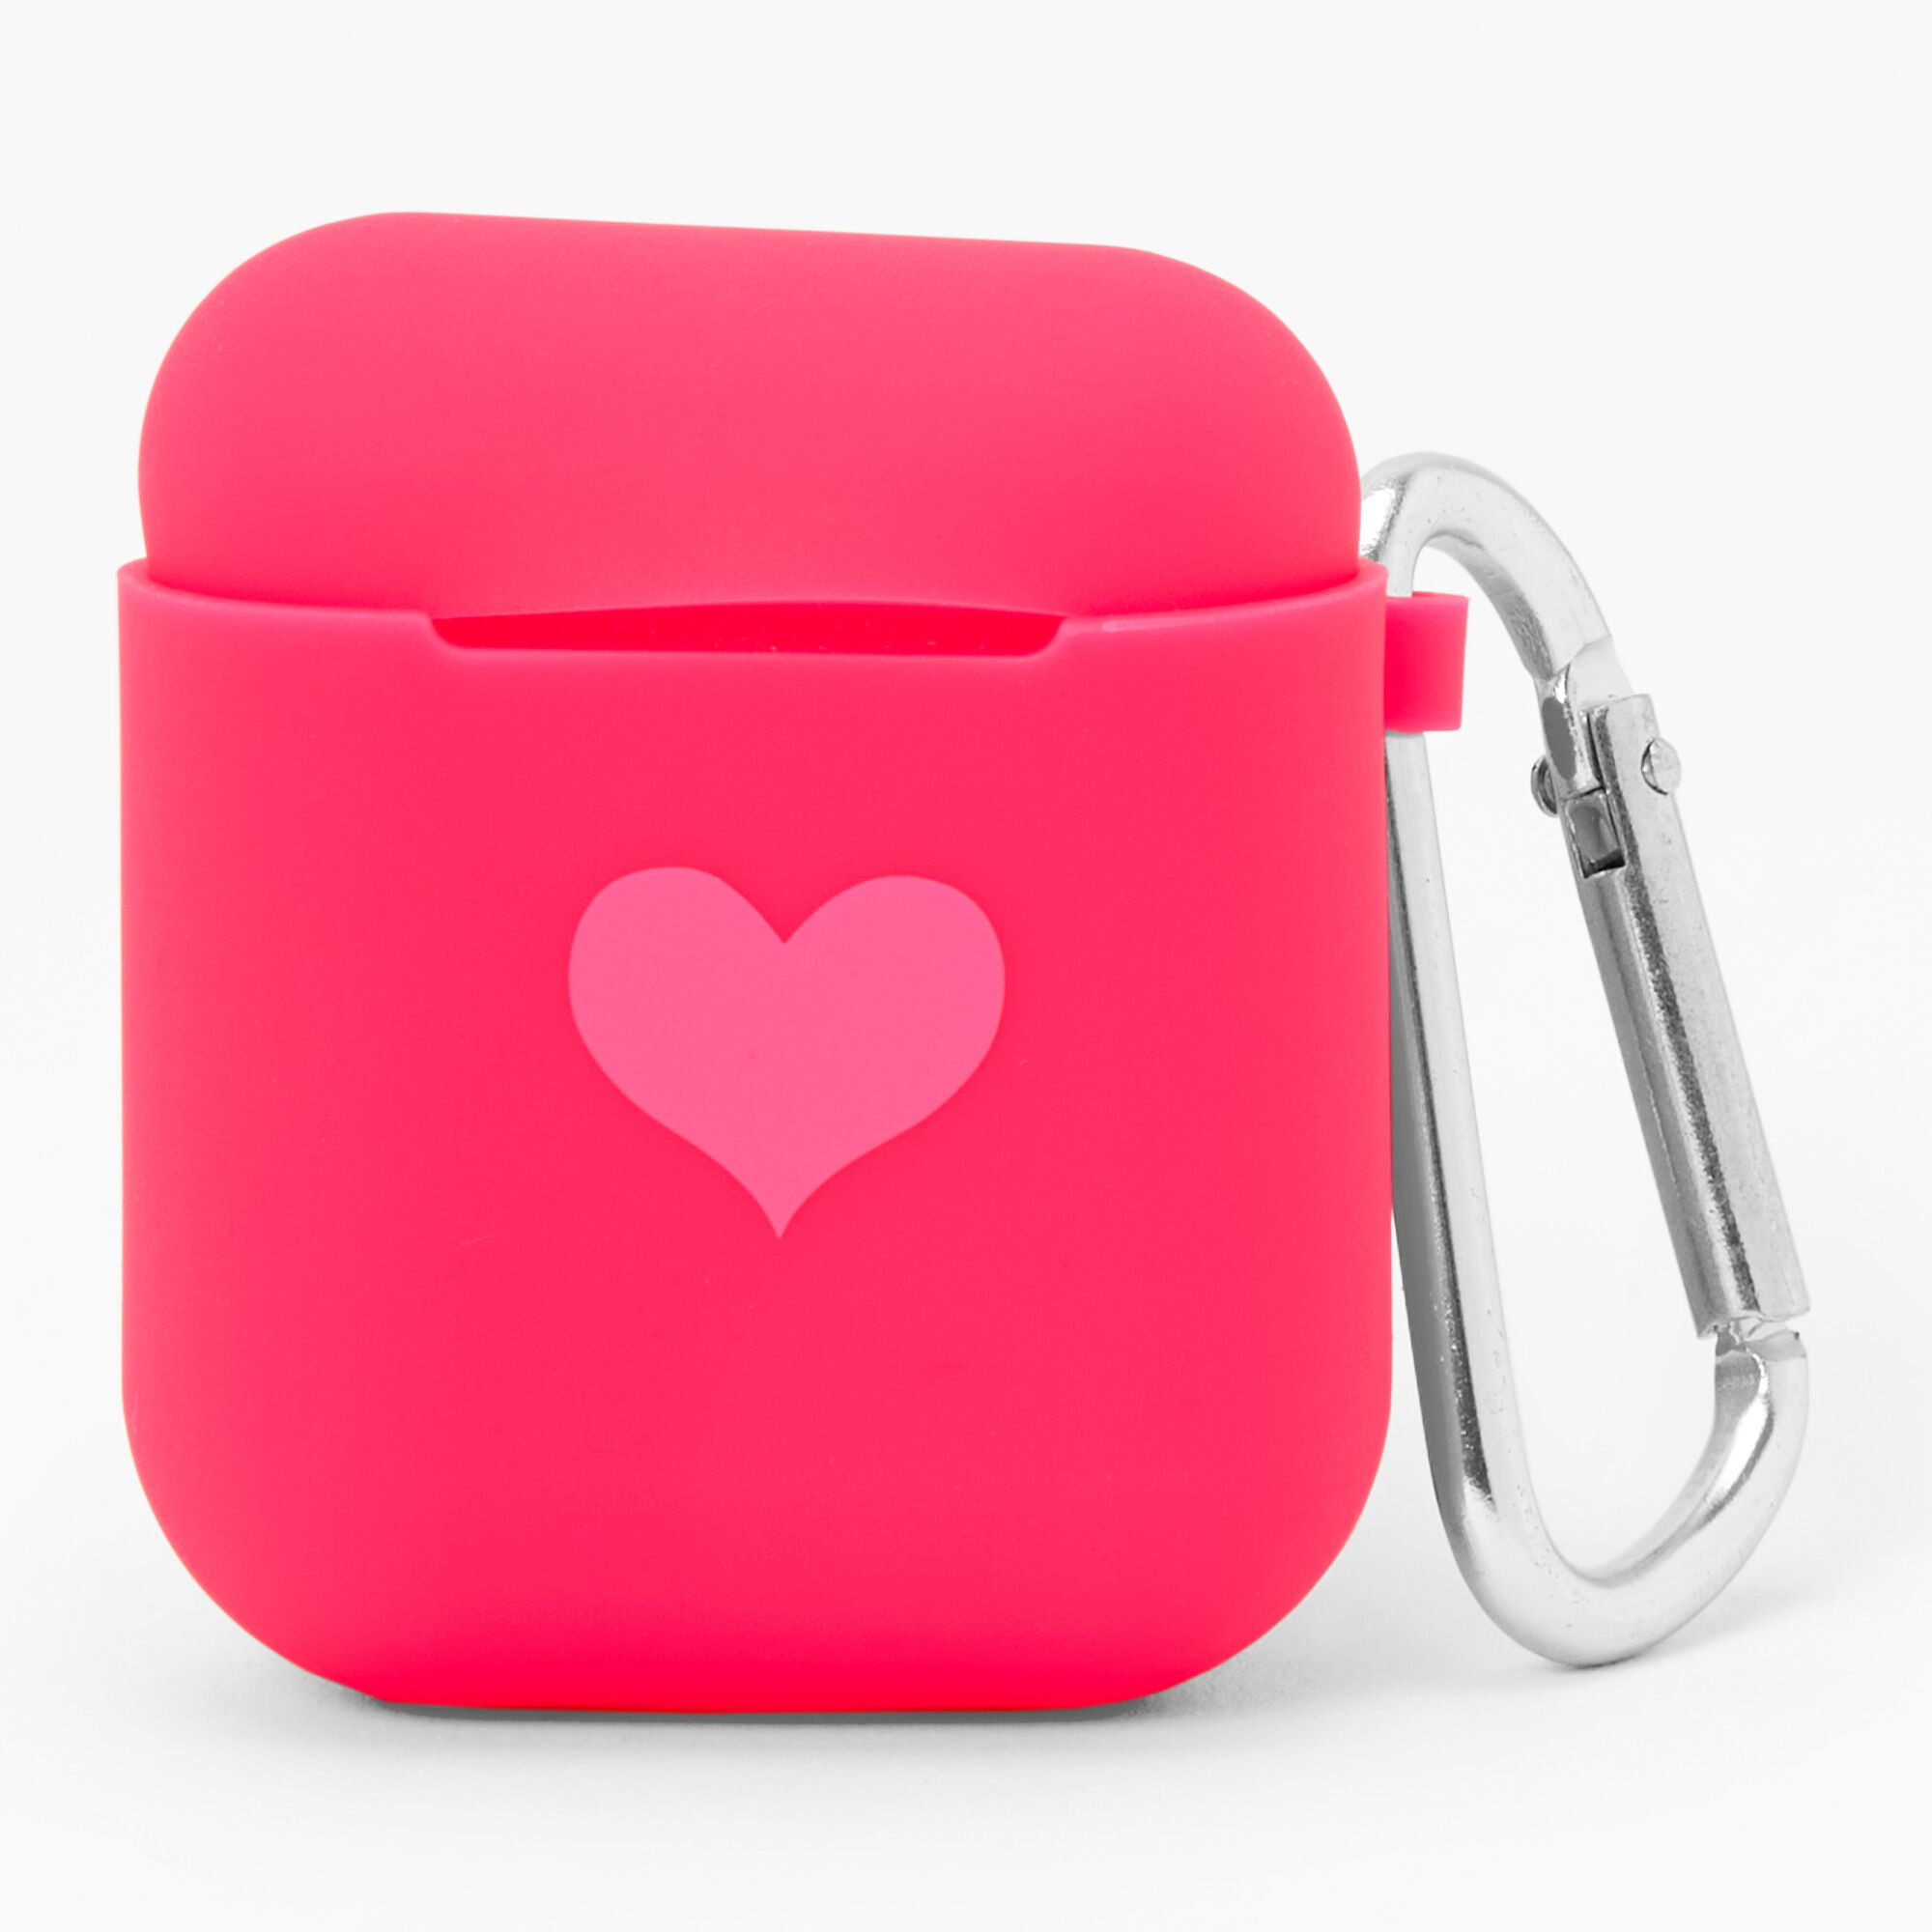 Illians Ook Black Hard Plastic Case for AirPods Pro Magnetic Lock Full Body Protective Shock-resistance Cover Pink Heart Design Wireless Charging